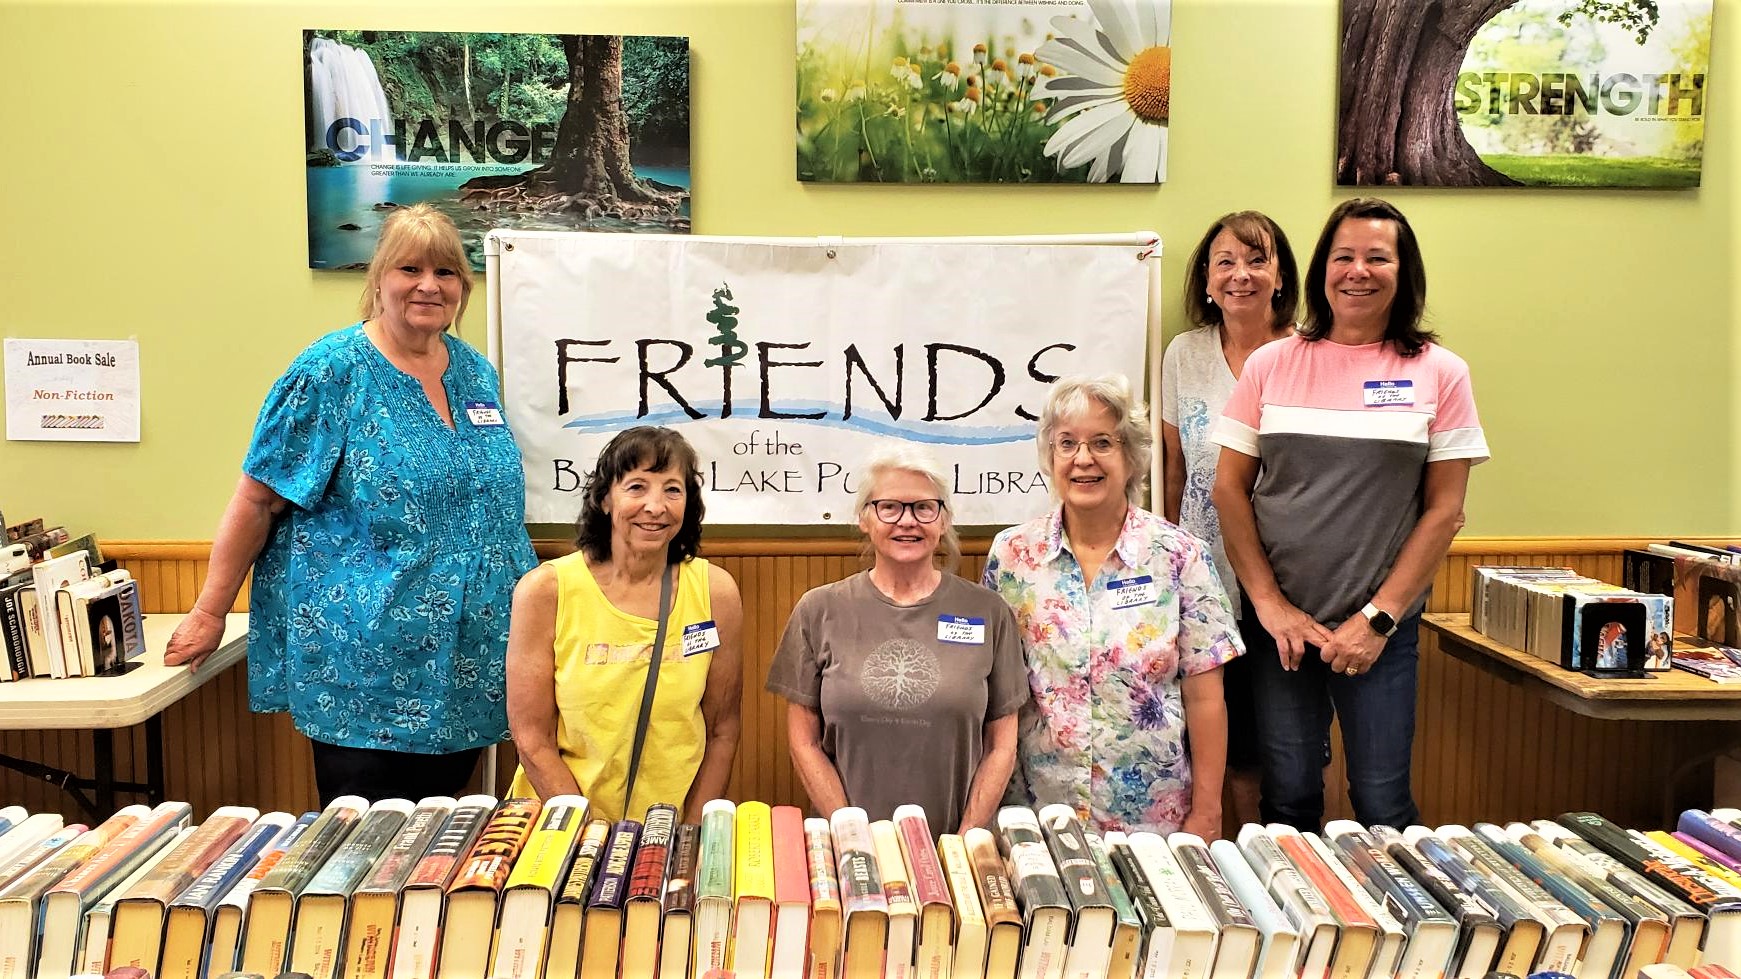 Friends of the Balsam Lake Public Library